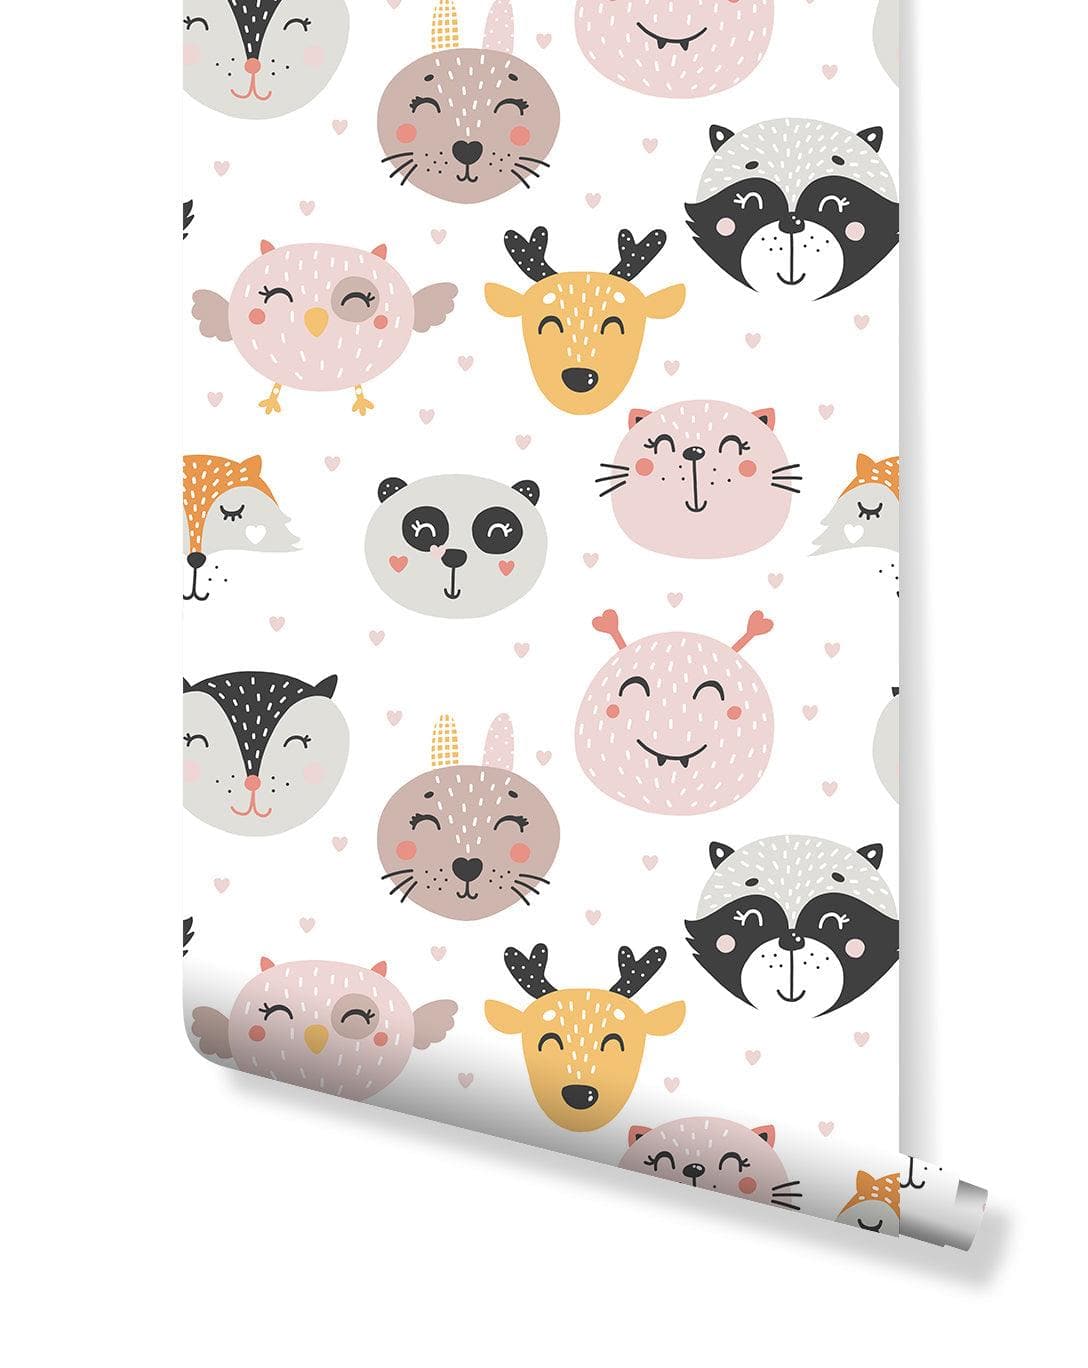 Cute Woodland Animals Removable Wallpaper - MAIA HOMES